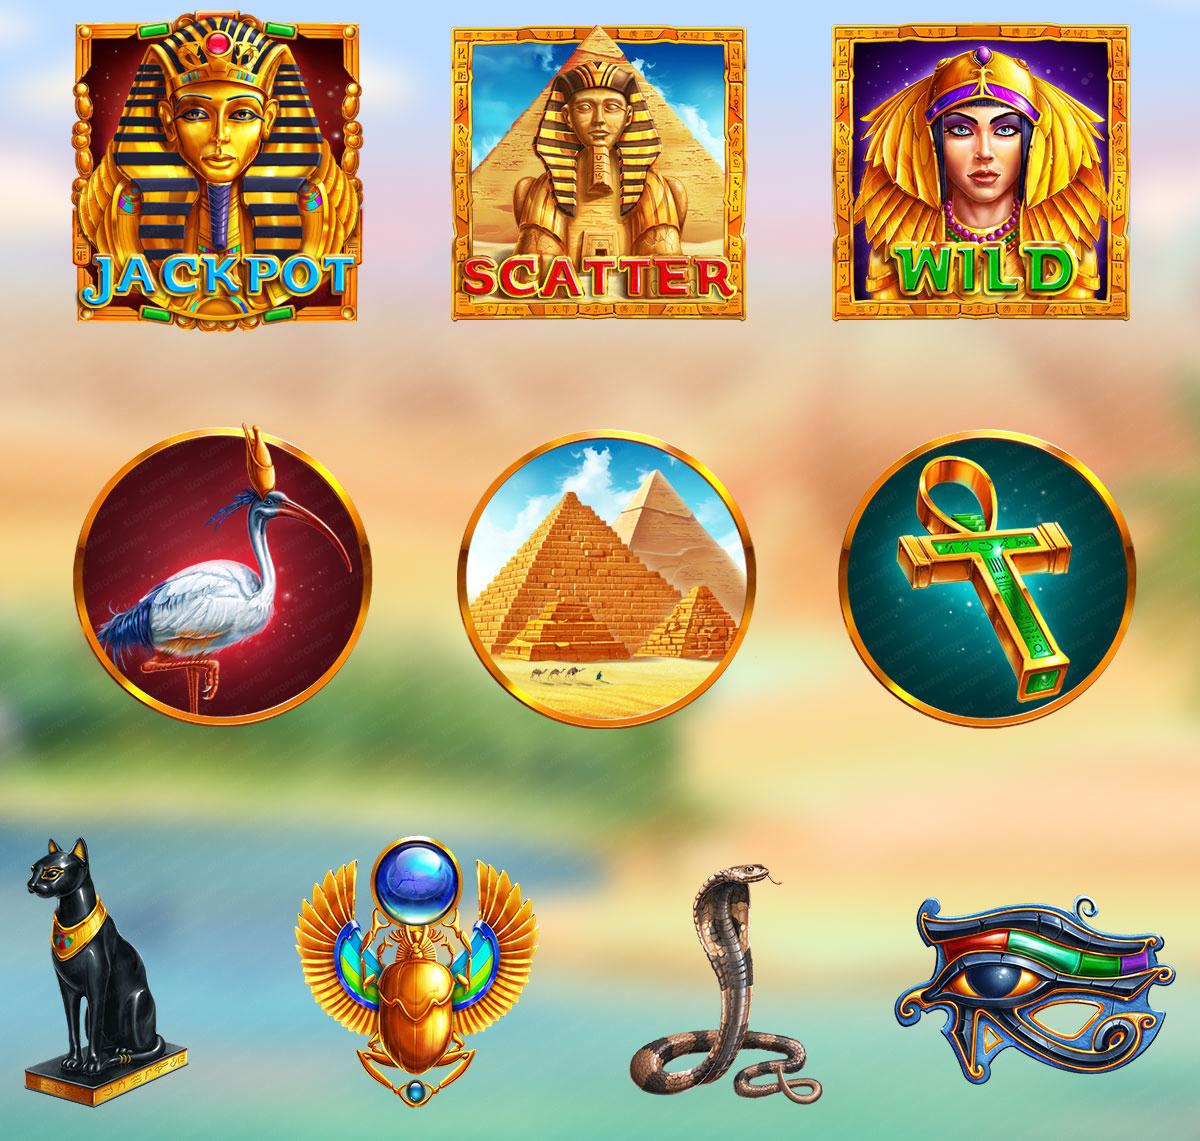 Egyptian Themed online slot game for SALE. Ancient Egypt Themed Slots